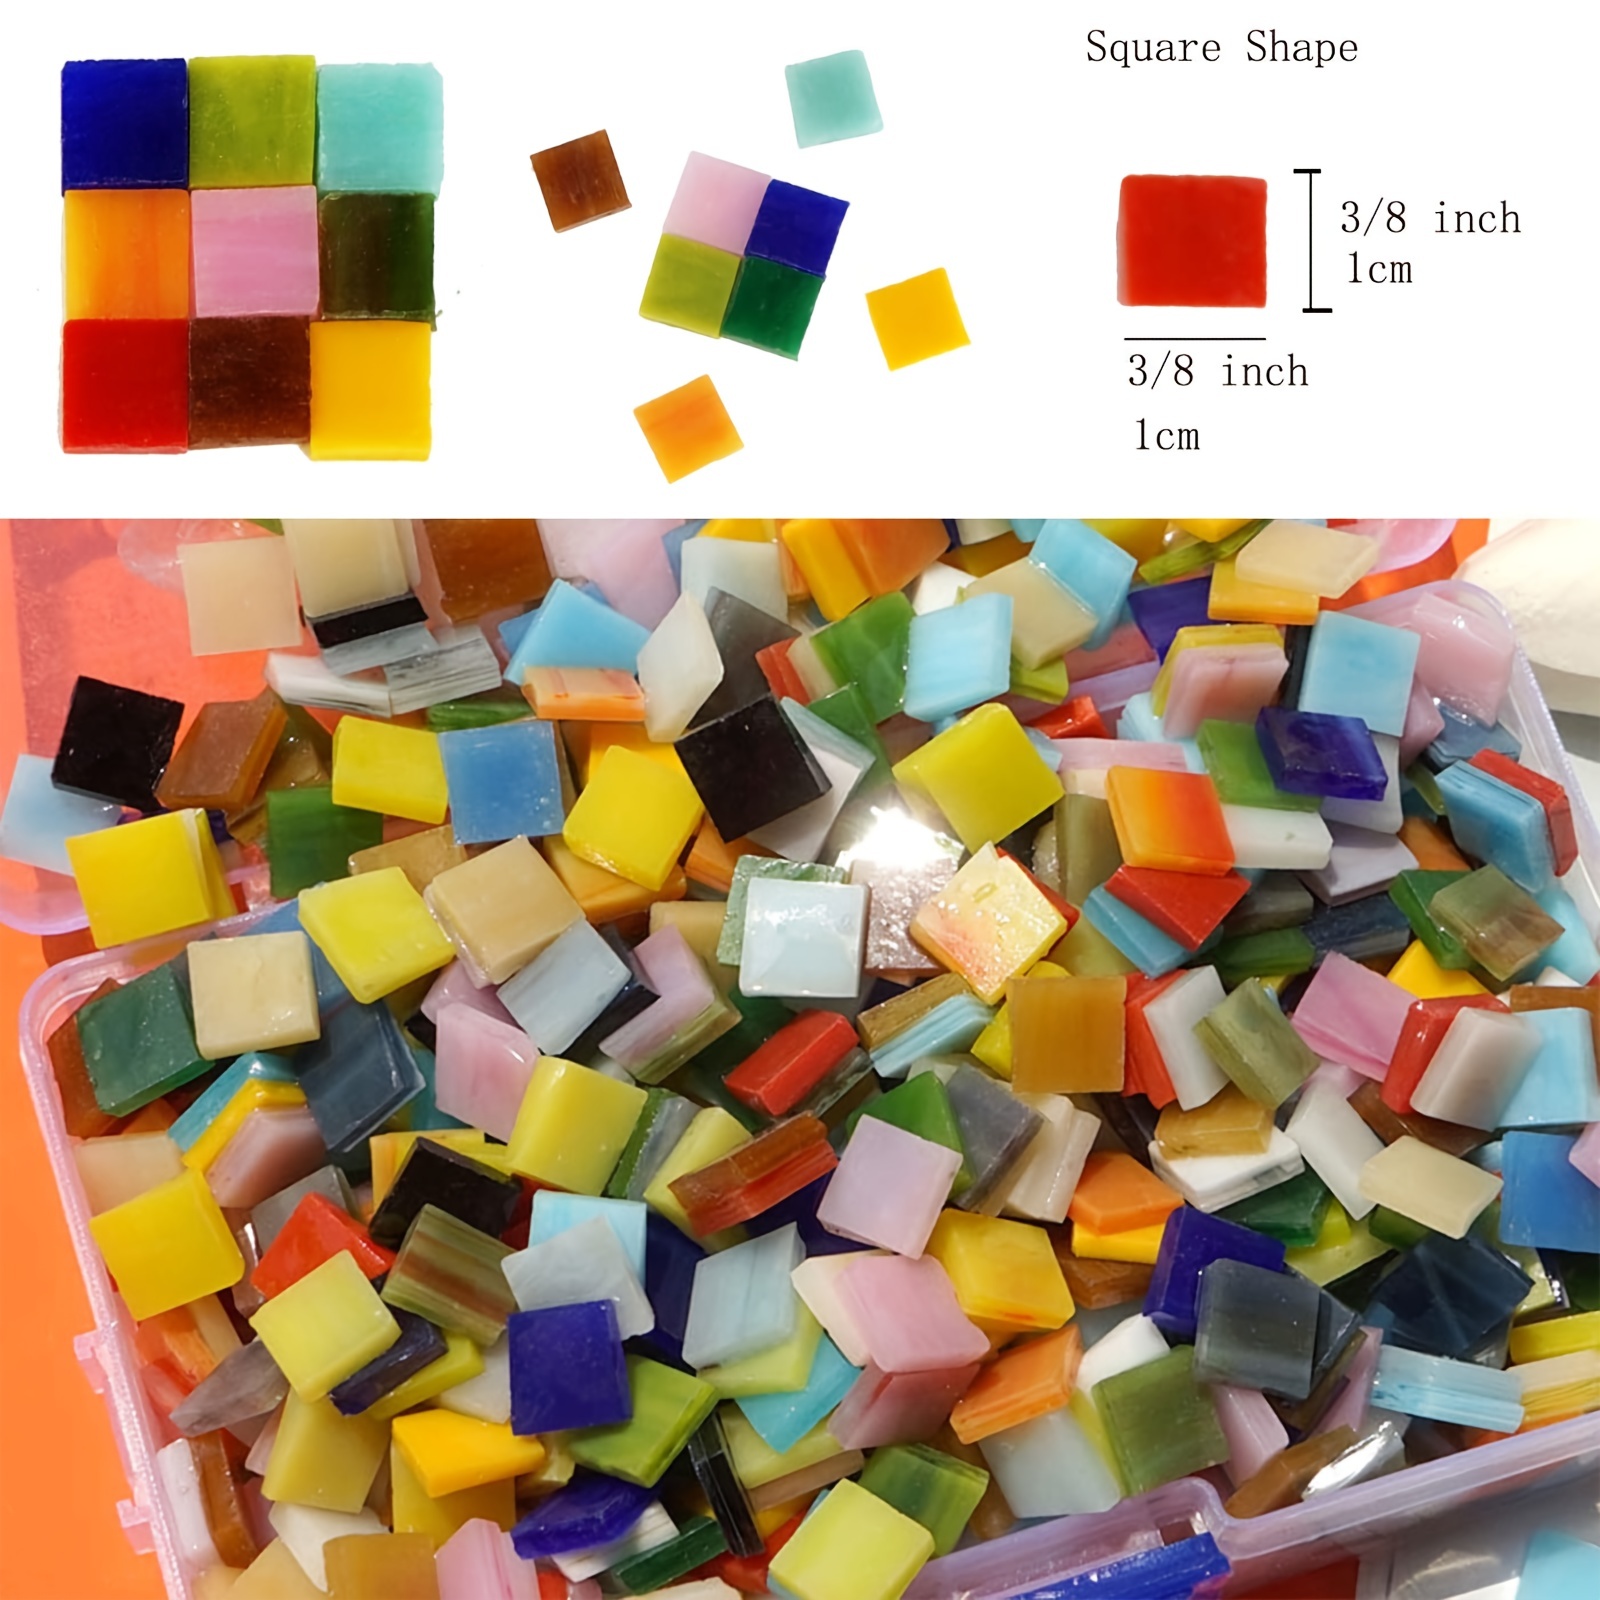  Sukh 570Pcs Mosaic Tiles for Crafts - Mosaic Glass Pieces Mixed  Colors and Shapes Stained Glass for Craft Supplies, Tiles Art, DIY Stained  Glass,Cfaft Glass, Glass Tiles,Tiny Craft, Mosaic Art 